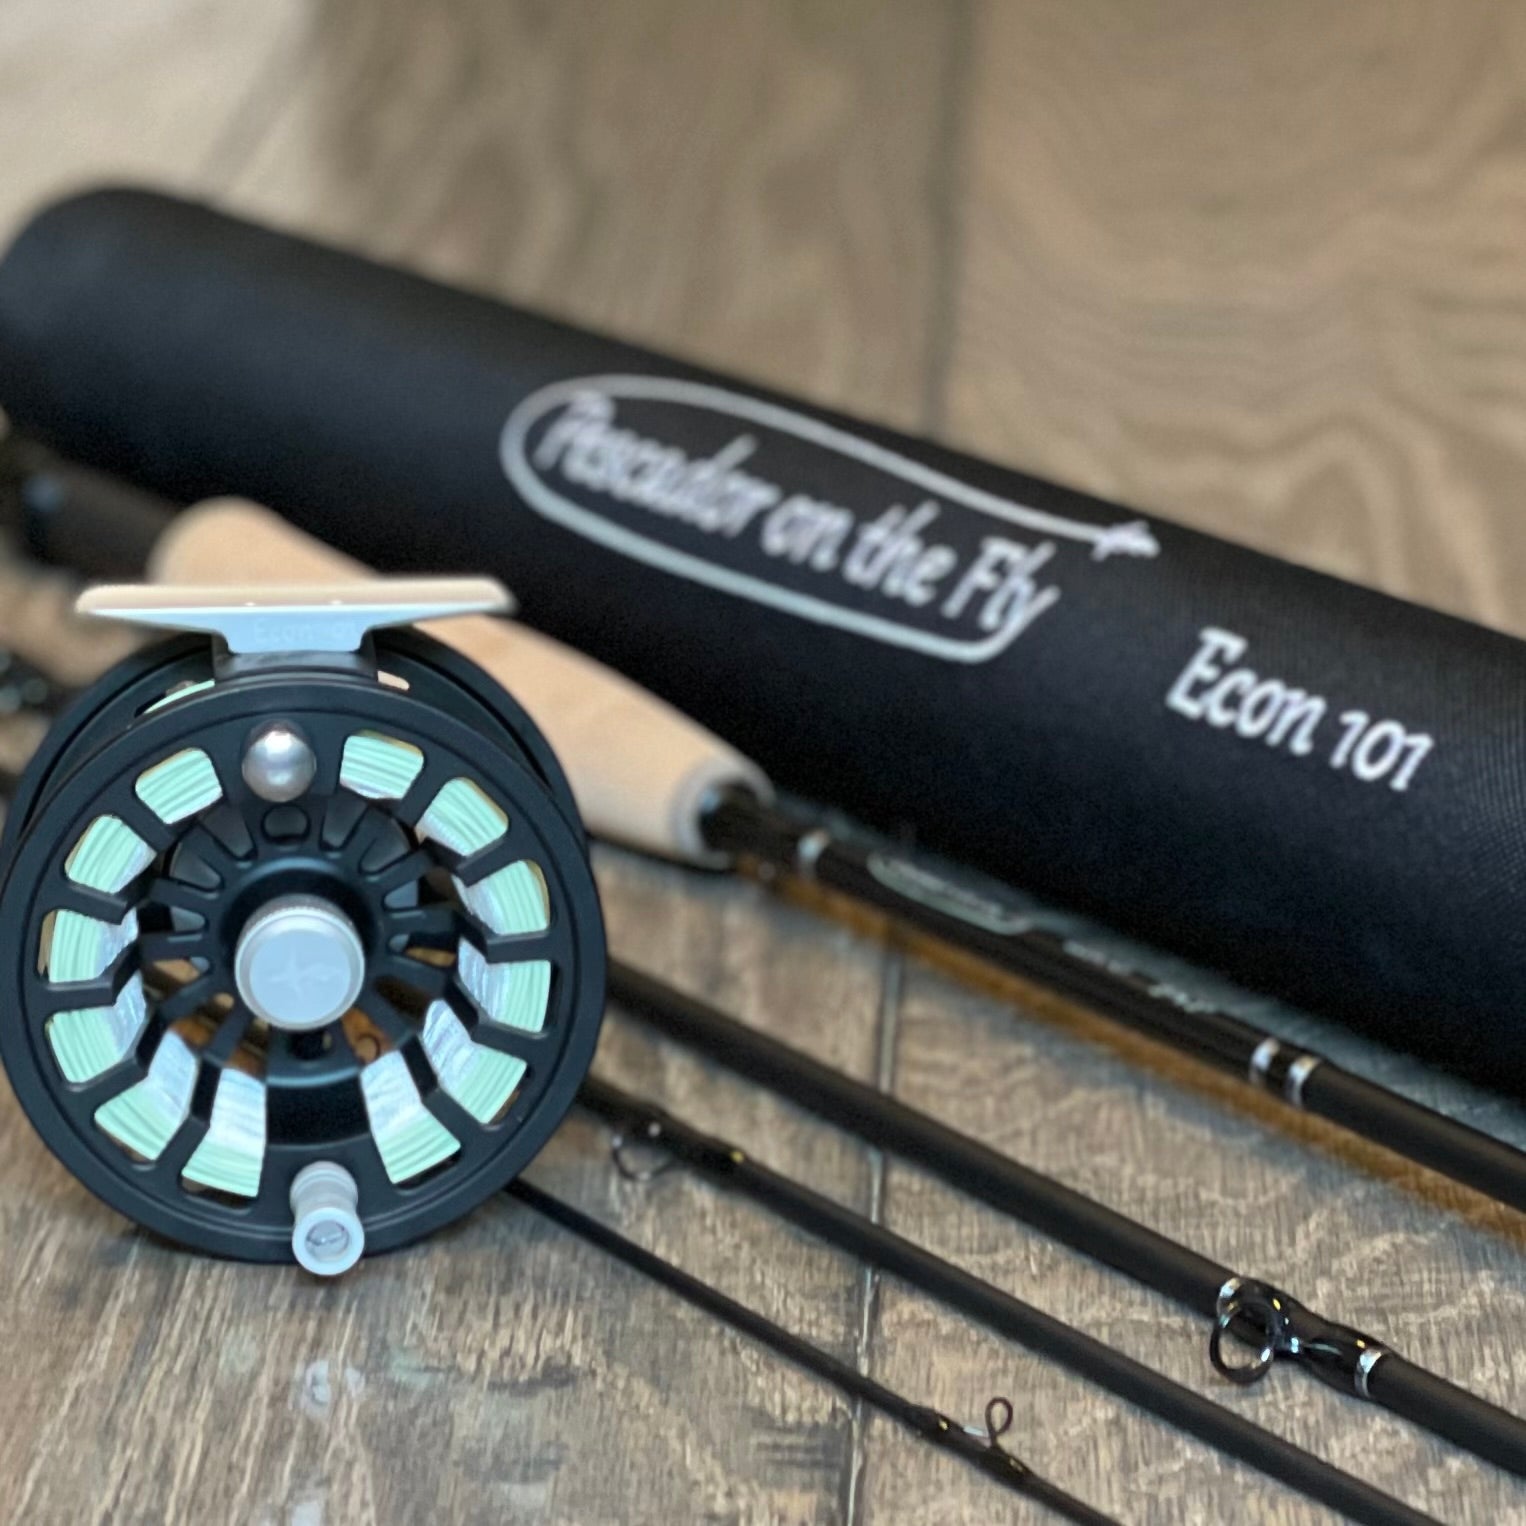 ECON 101 Fly Fishing Starter Combo Package | 1004-3 | 10' Four Section 3 Weight Euro Nymph Fly Rod And Reel Beginner Outfit